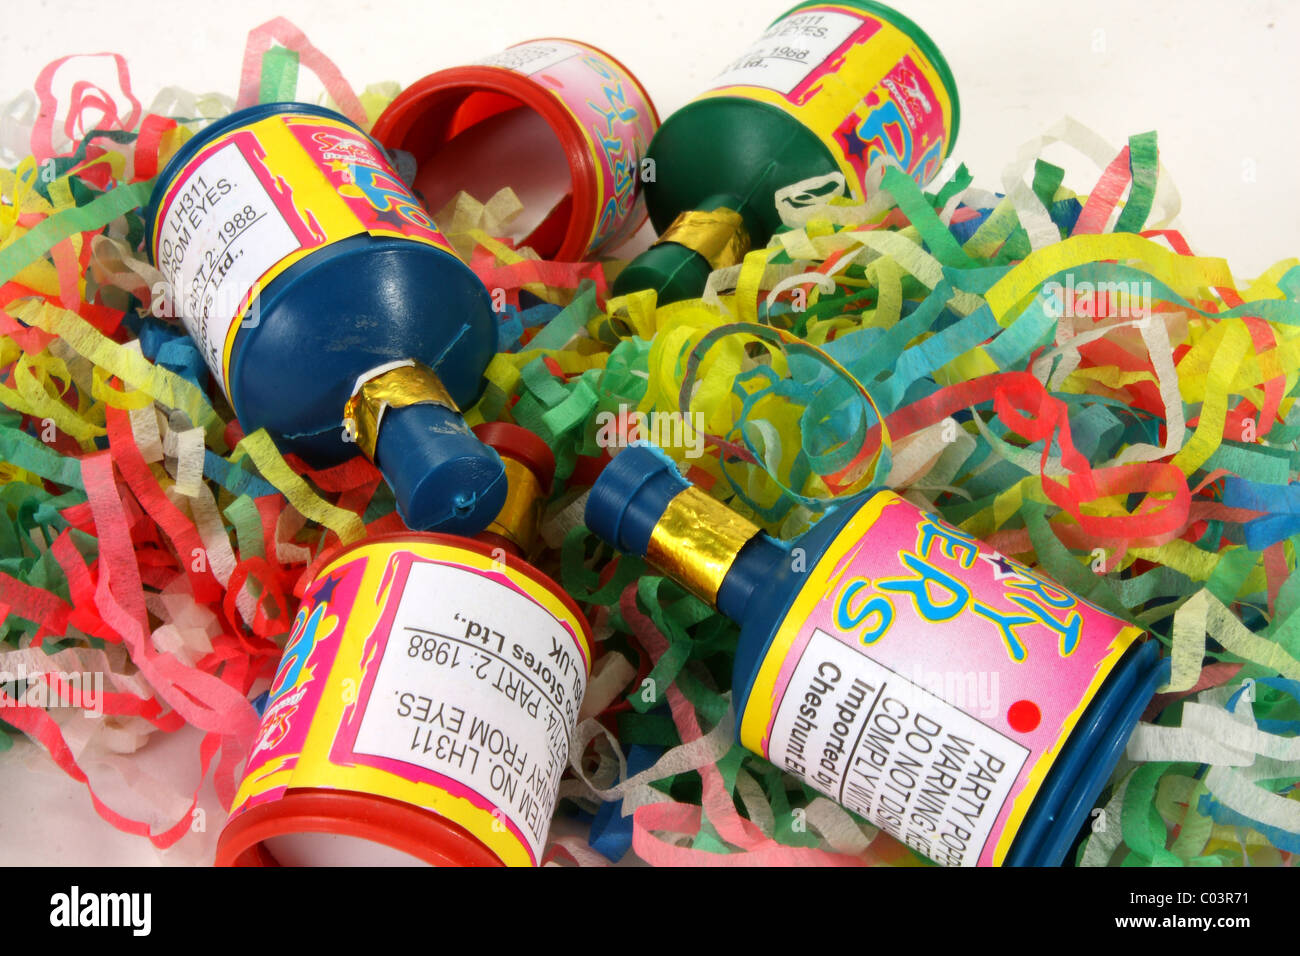 Party poppers with confetti to celebrate different occasions such as birthdays, engagement and Christmas. Stock Photo